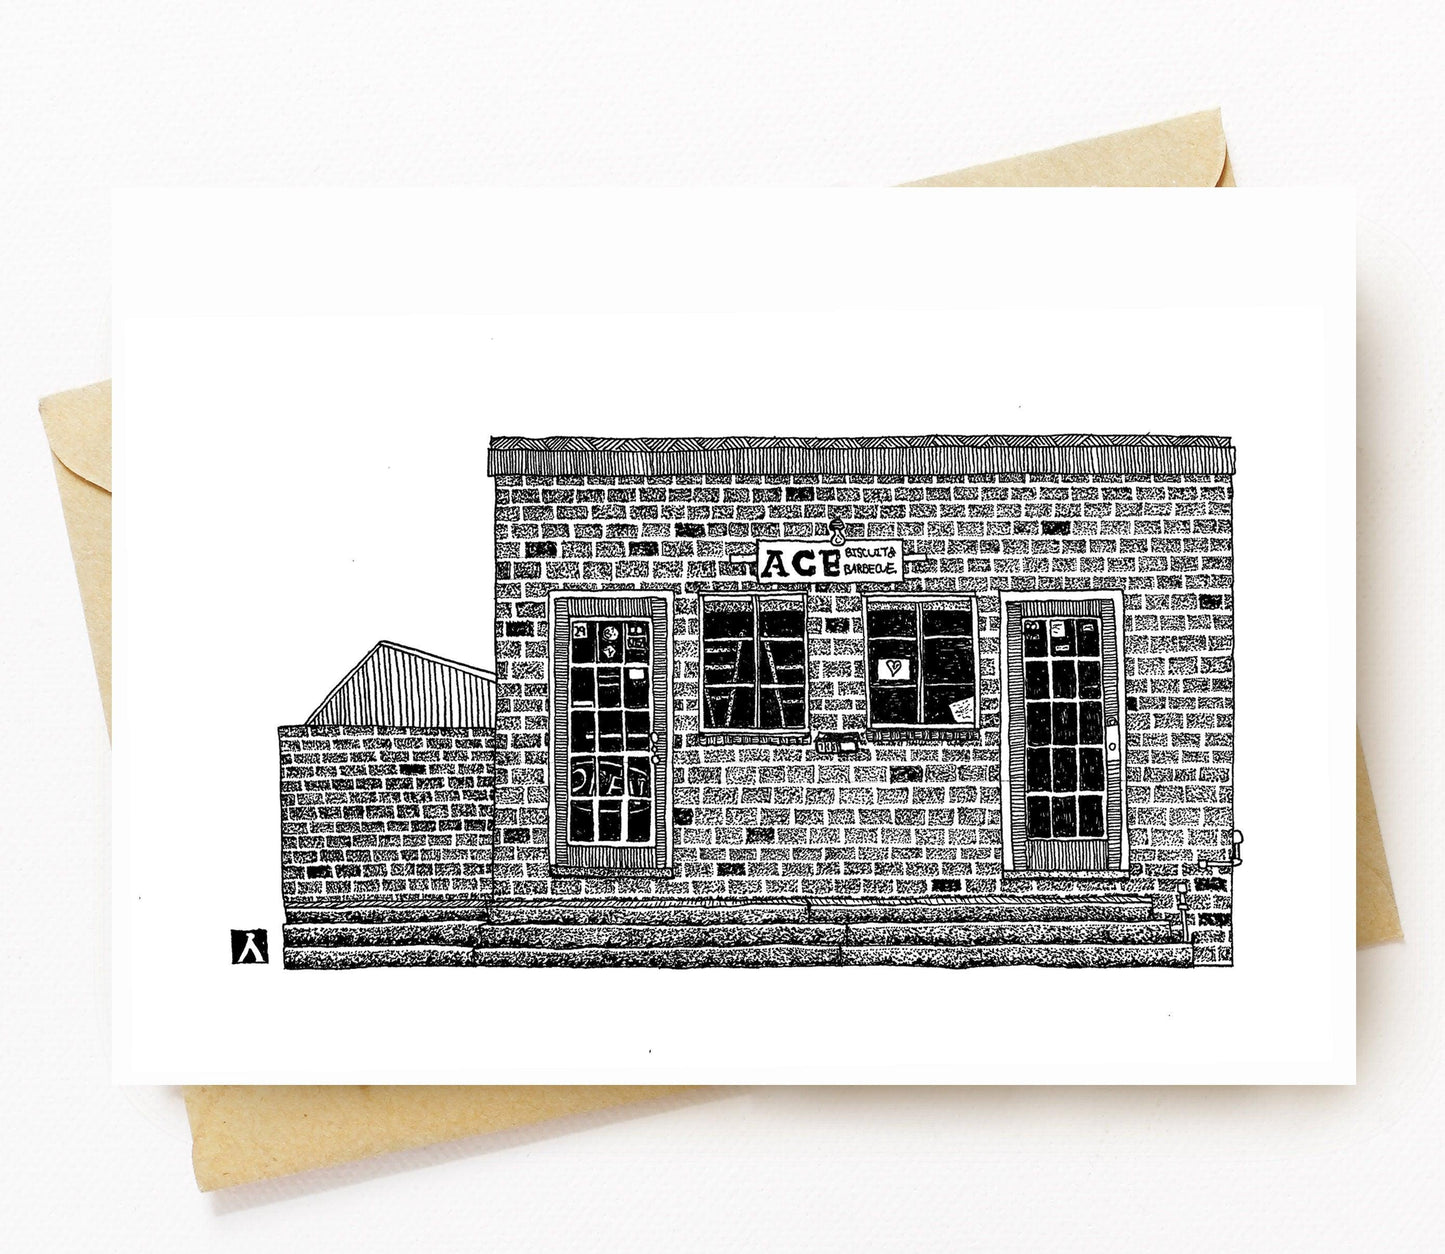 BellavanceInk: Greeting Card With A Pen & Ink Drawing Of ACE Barbecue Restaurant Shop In Charlottesville 5 x 7 Inches - BellavanceInk